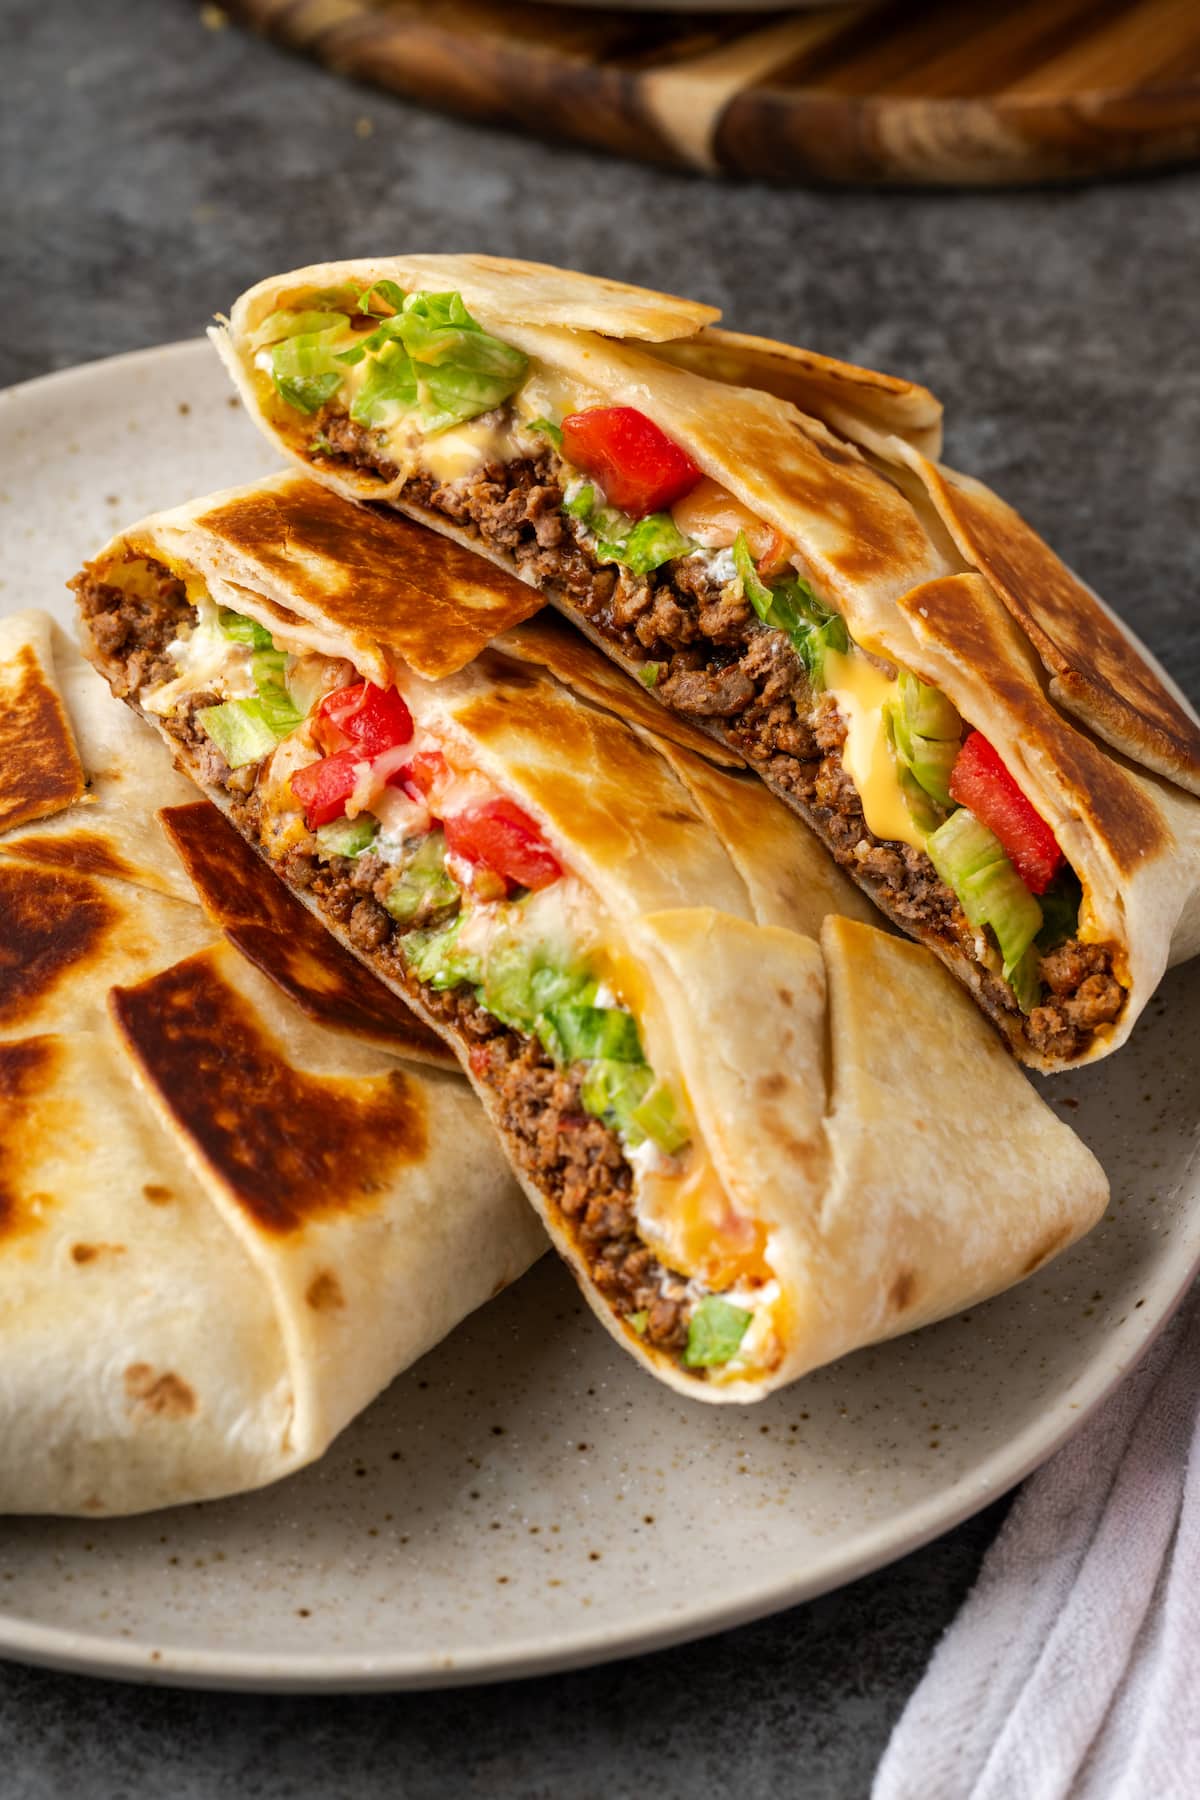 Two pan-fried crunch wraps on a plate, with one crunch wrap cut in half to reveal the layers inside.